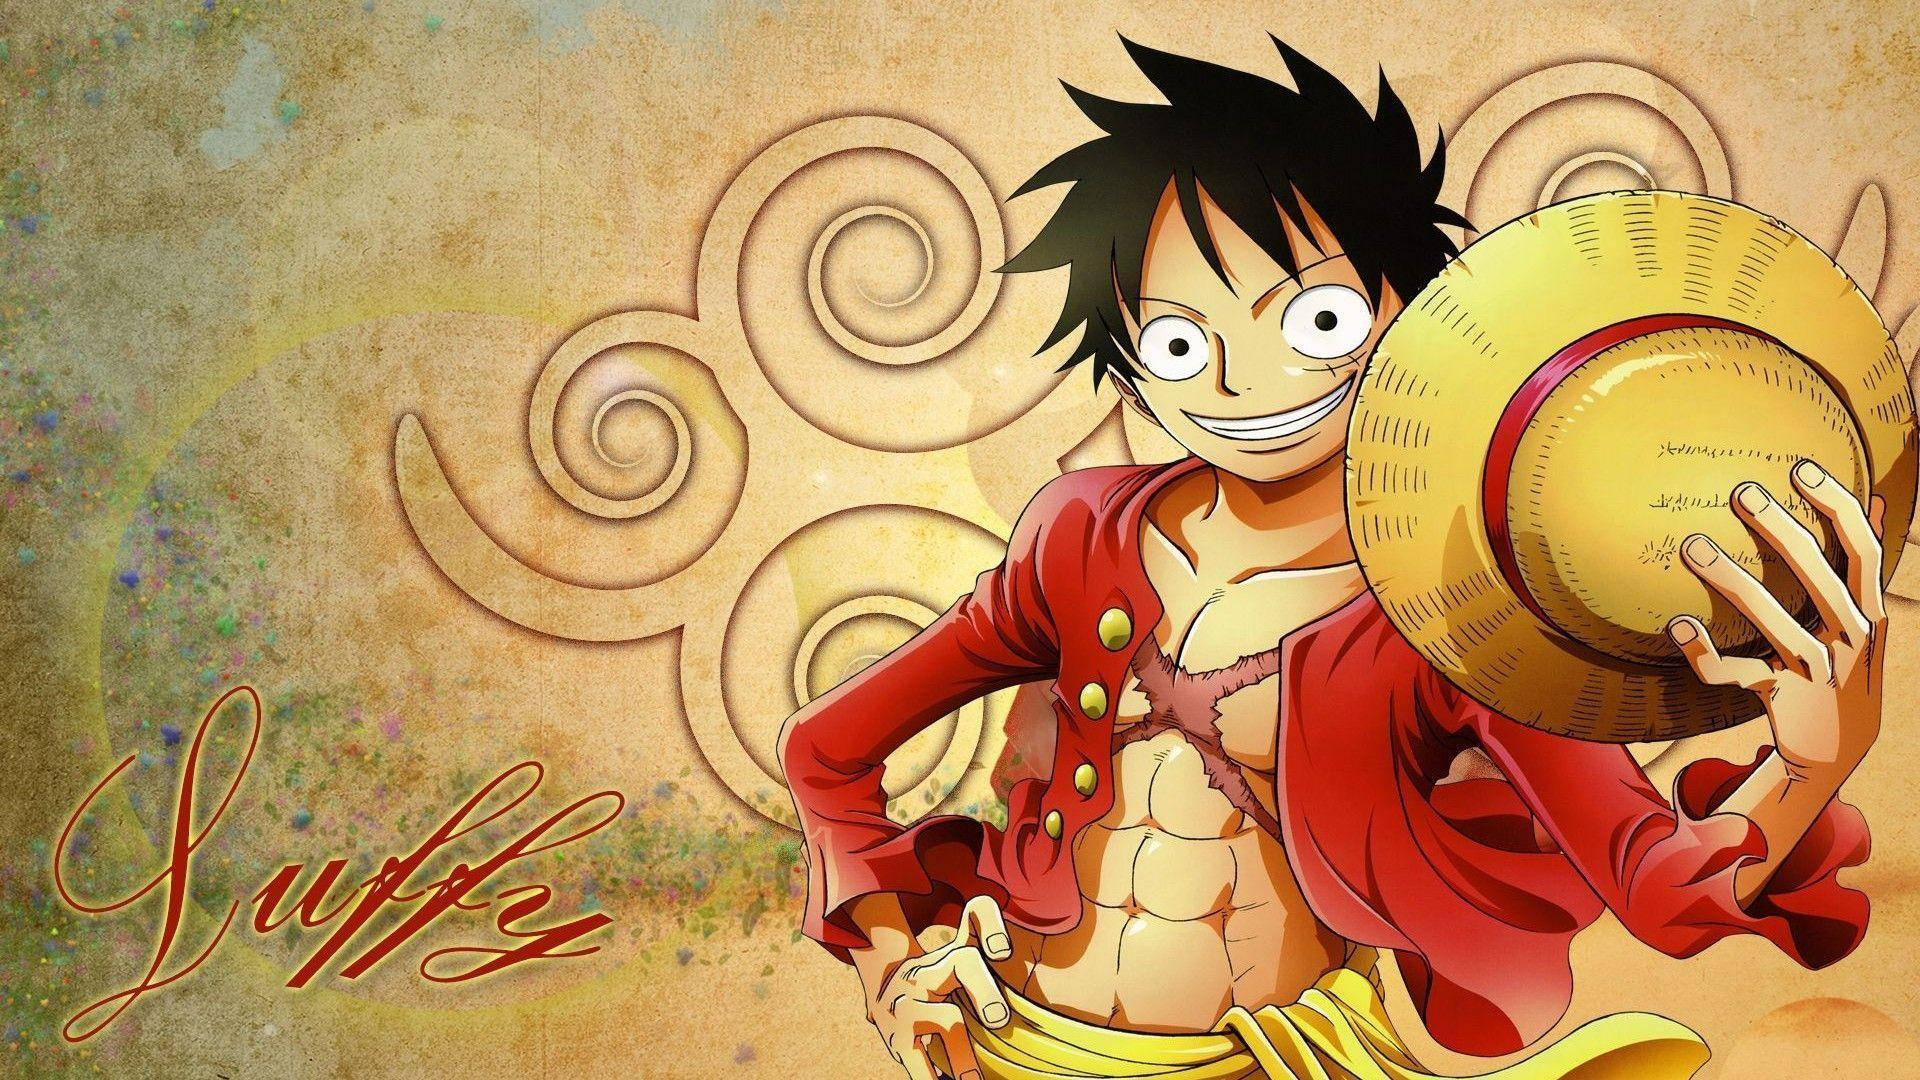 Luffy 4k With Iconic Straw Hat Wallpaper